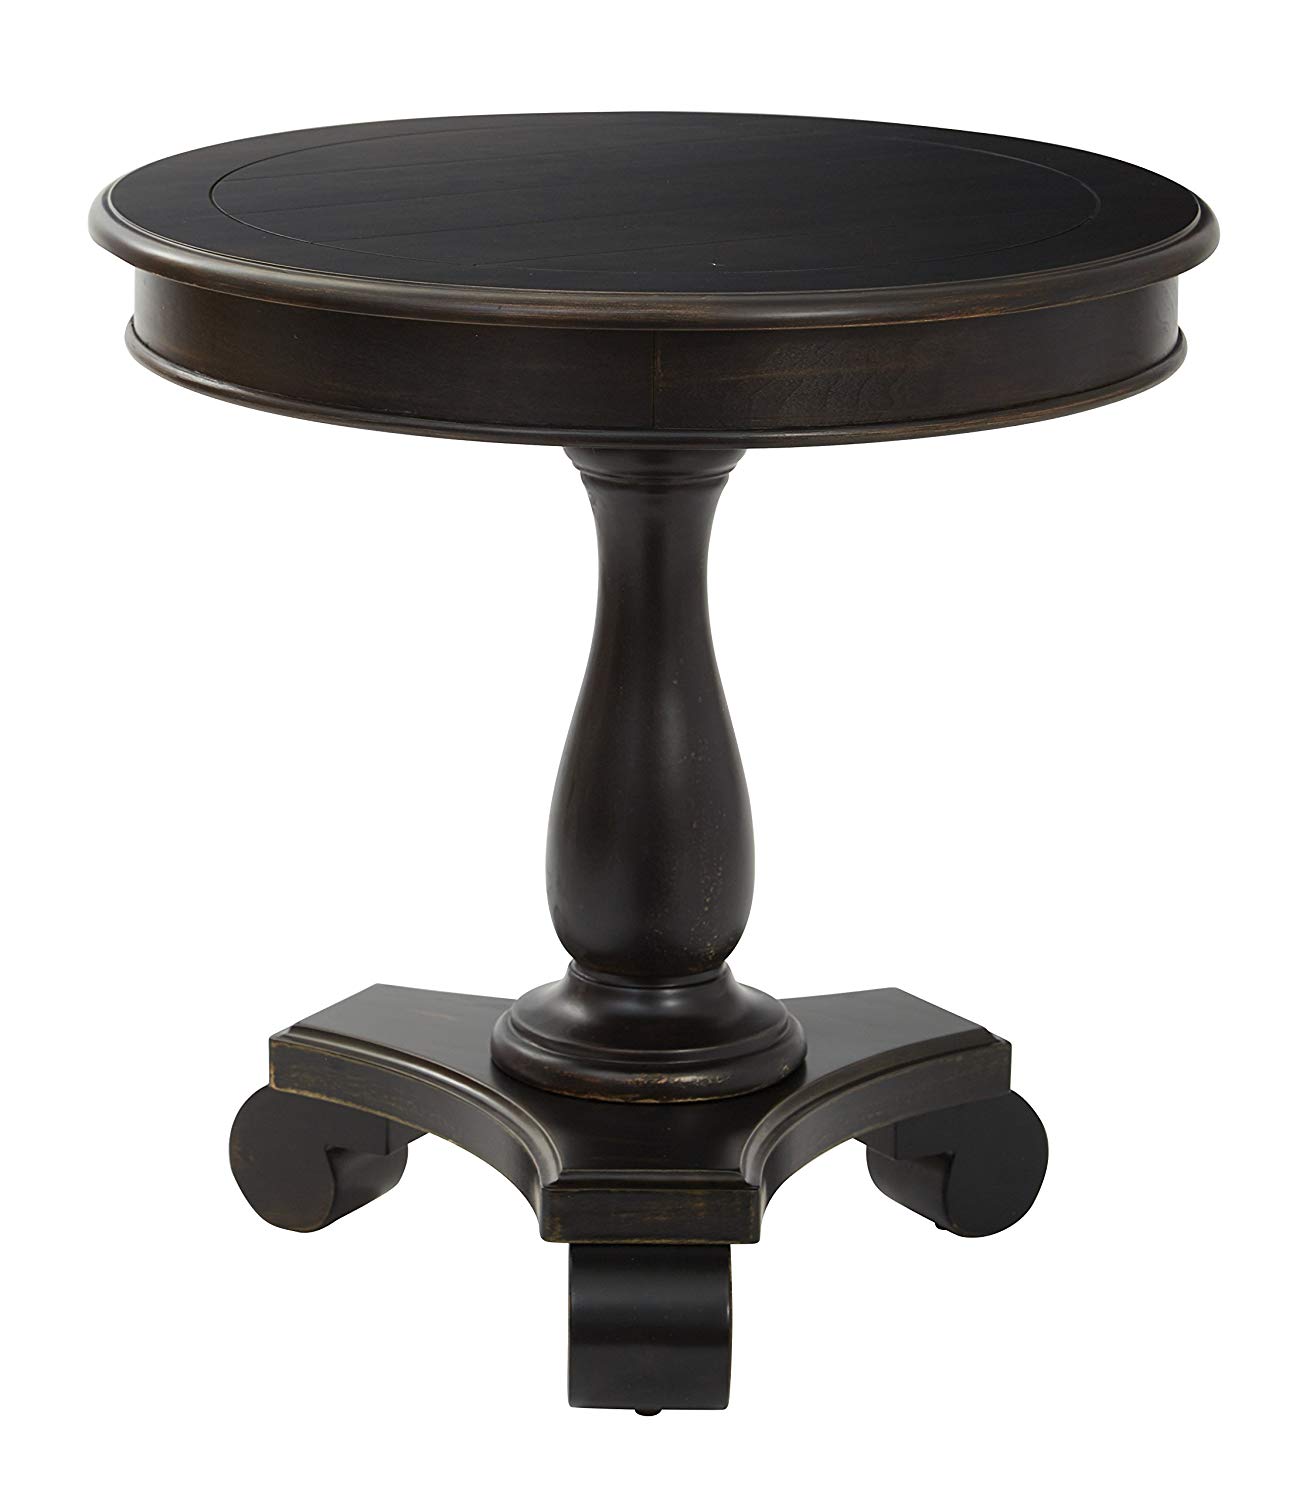 inspired bassett avlat osp avalon round black pedestal accent table antique kitchen dining half moon vintage asian lamps mirrored nightstand target small metal drum mats and